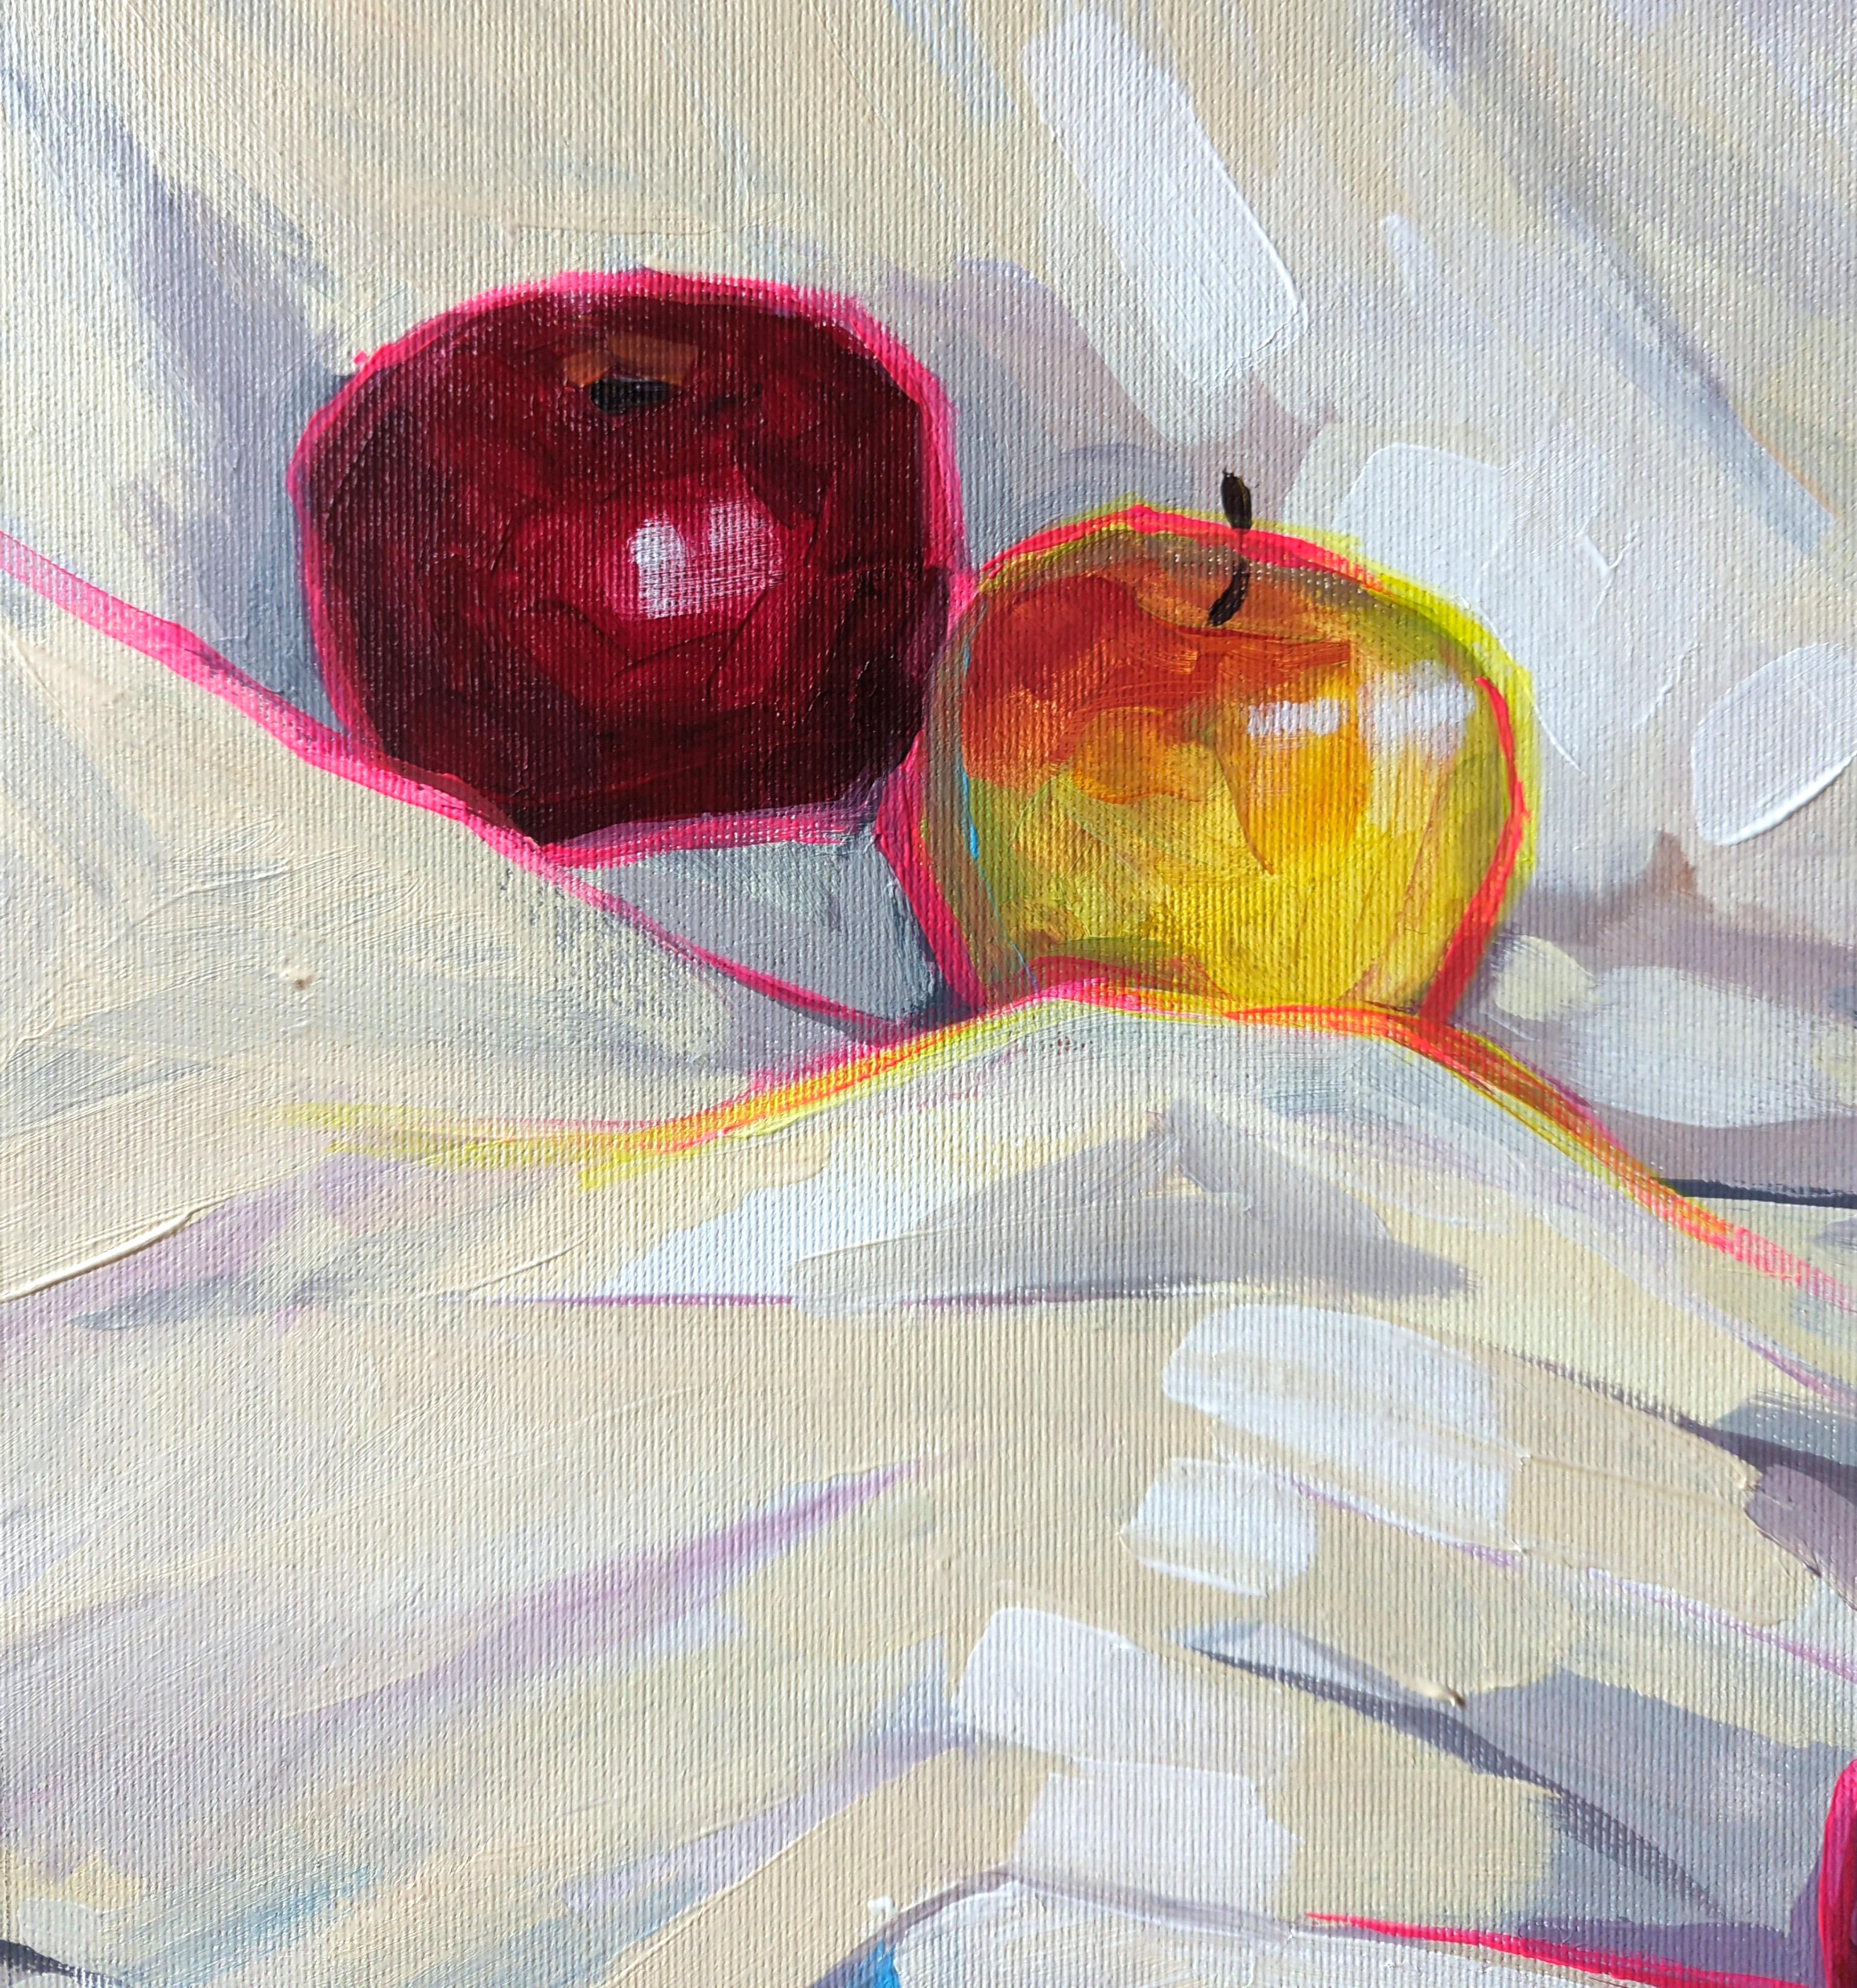 You will receive this painting stretched, with painted edges and completely ready for hanging. Framing is not obligatory and depends only on your preference.

This painting was inspired by the beauty of juicy apples purchased at the farmer's market.